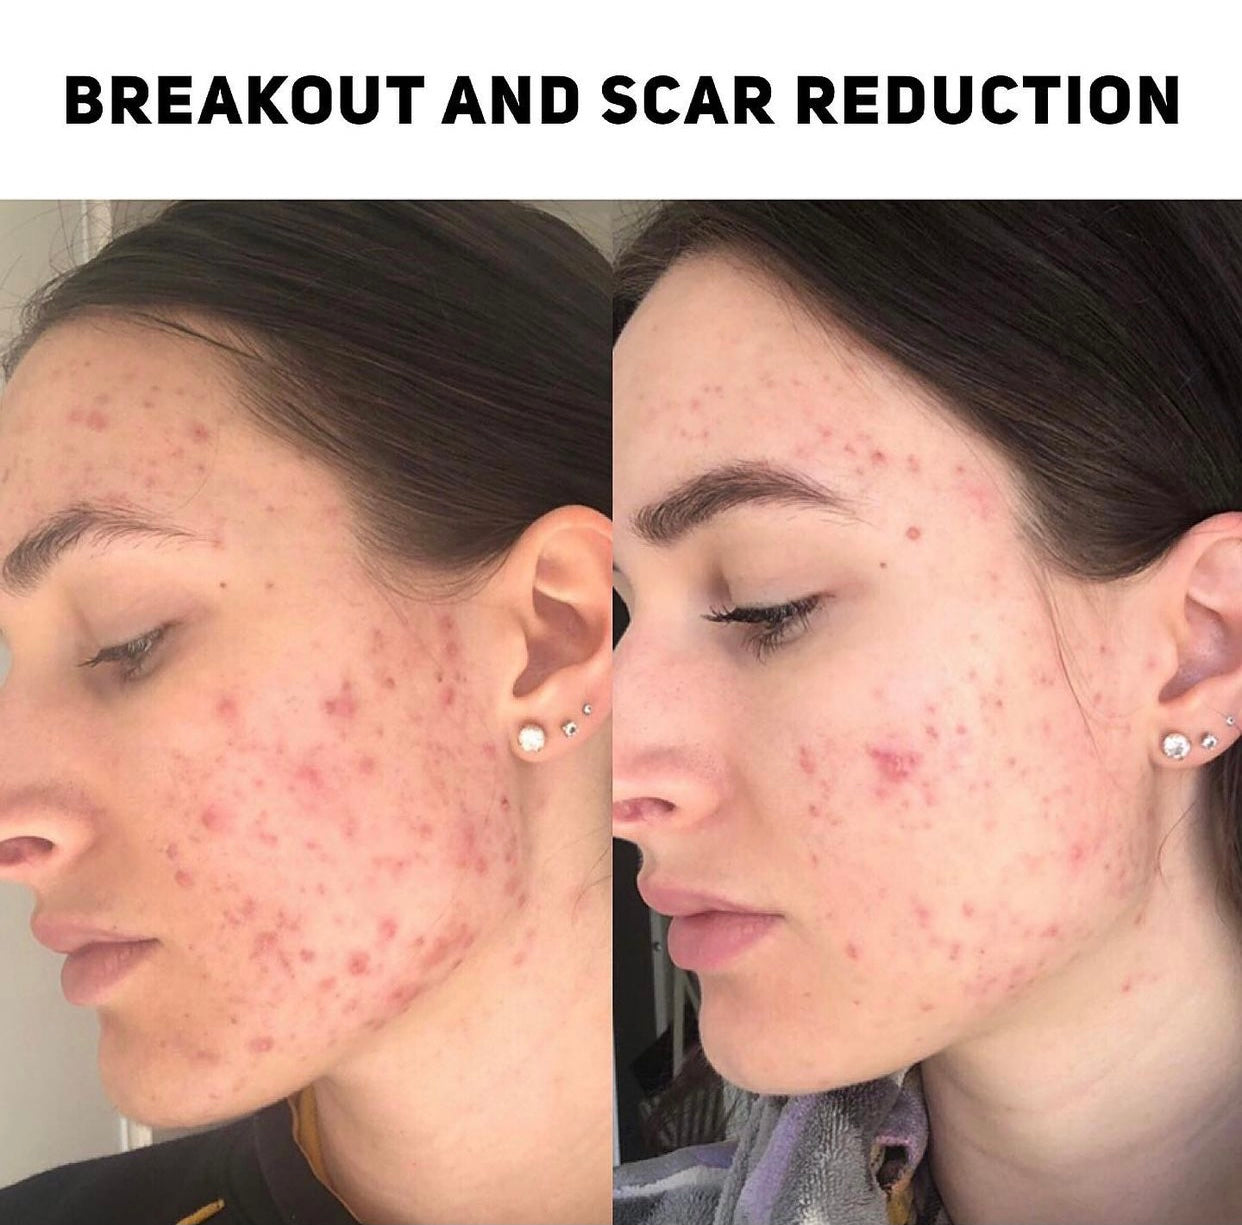 Young woman's face before and after breakout and scar reduction, showcased on Spa Circle Brands' product listing.